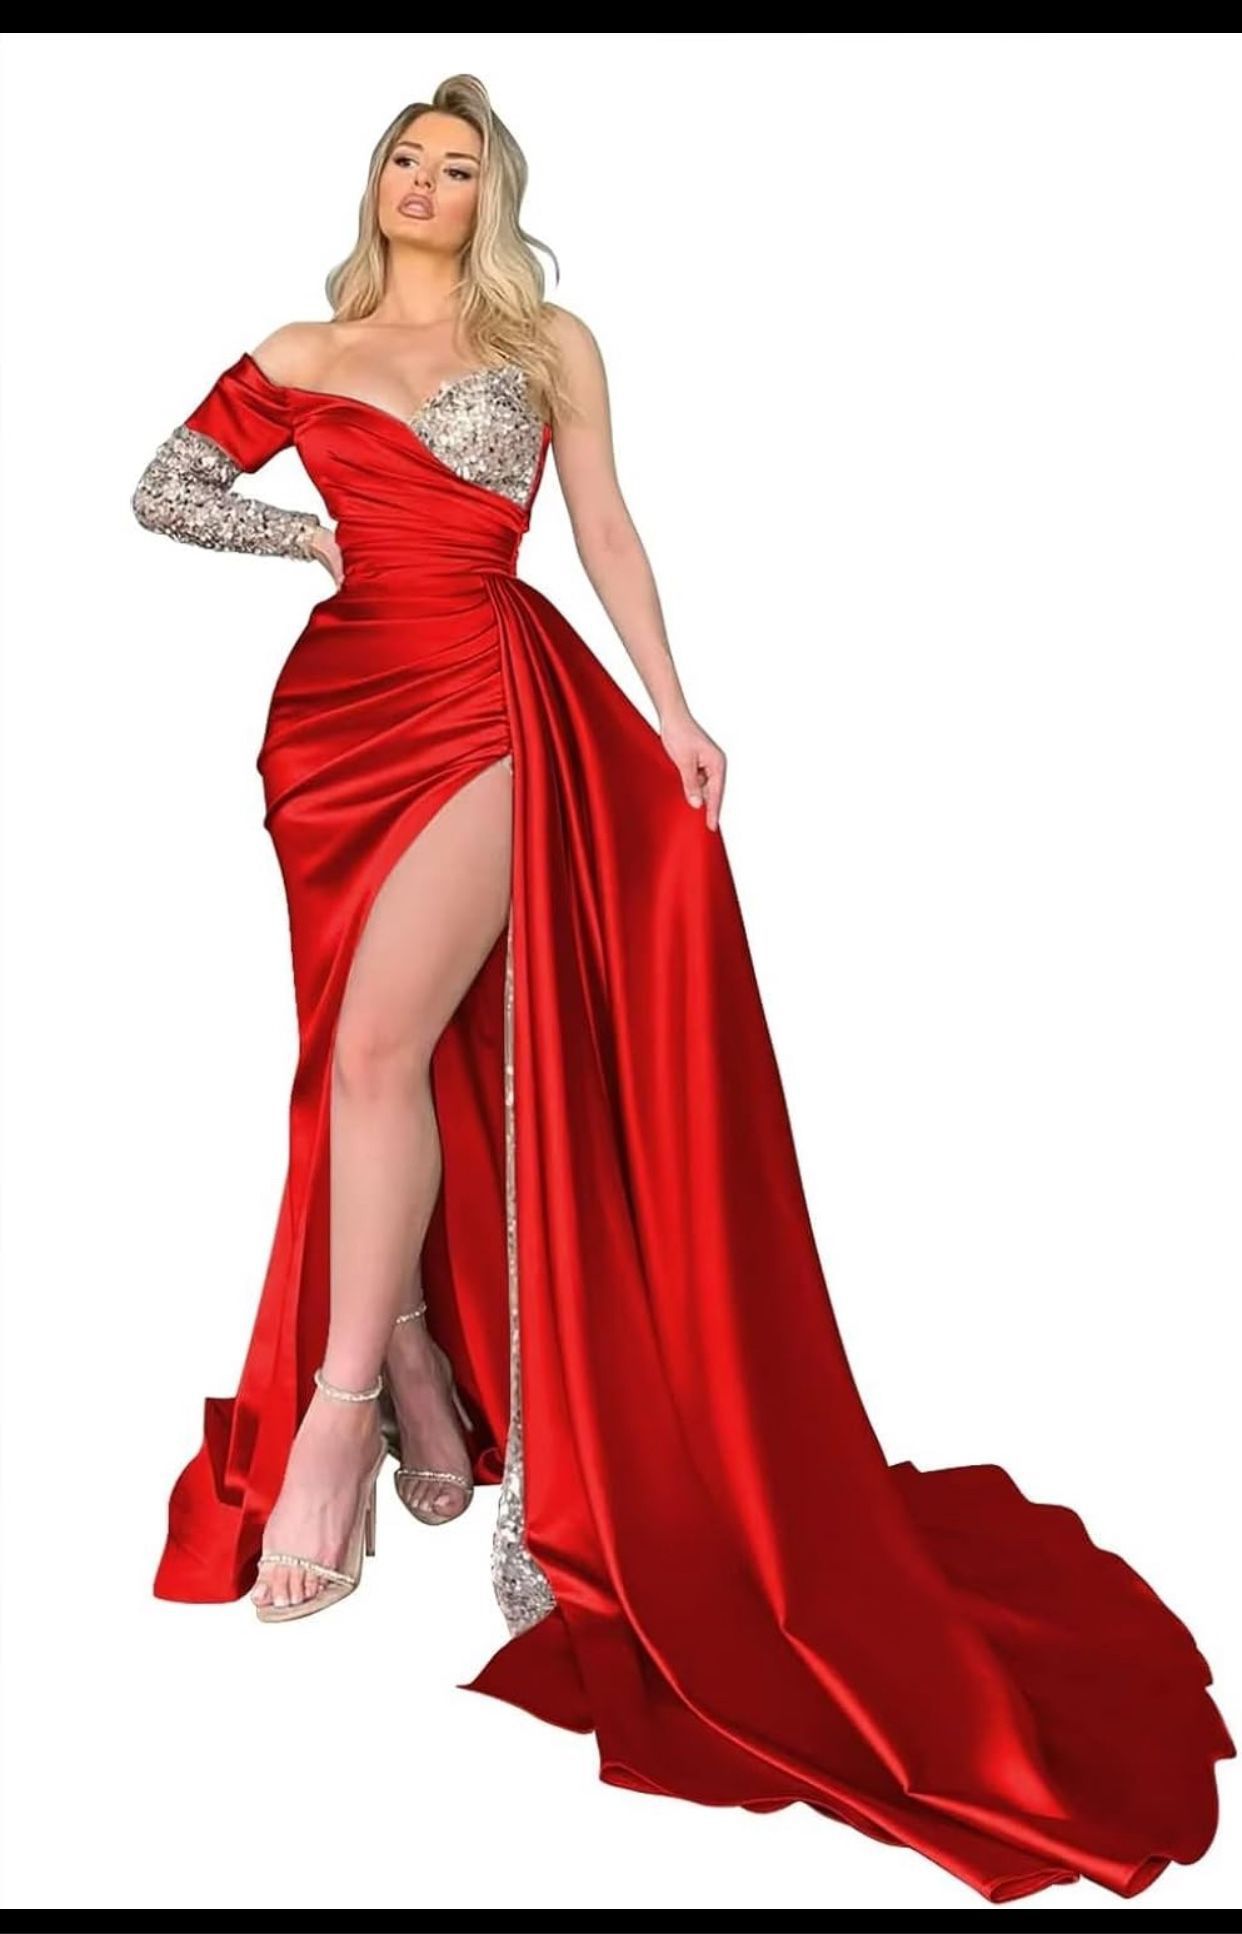 Women Mermaid Prom Dresses Long Satin Formal Evening Party Gowns